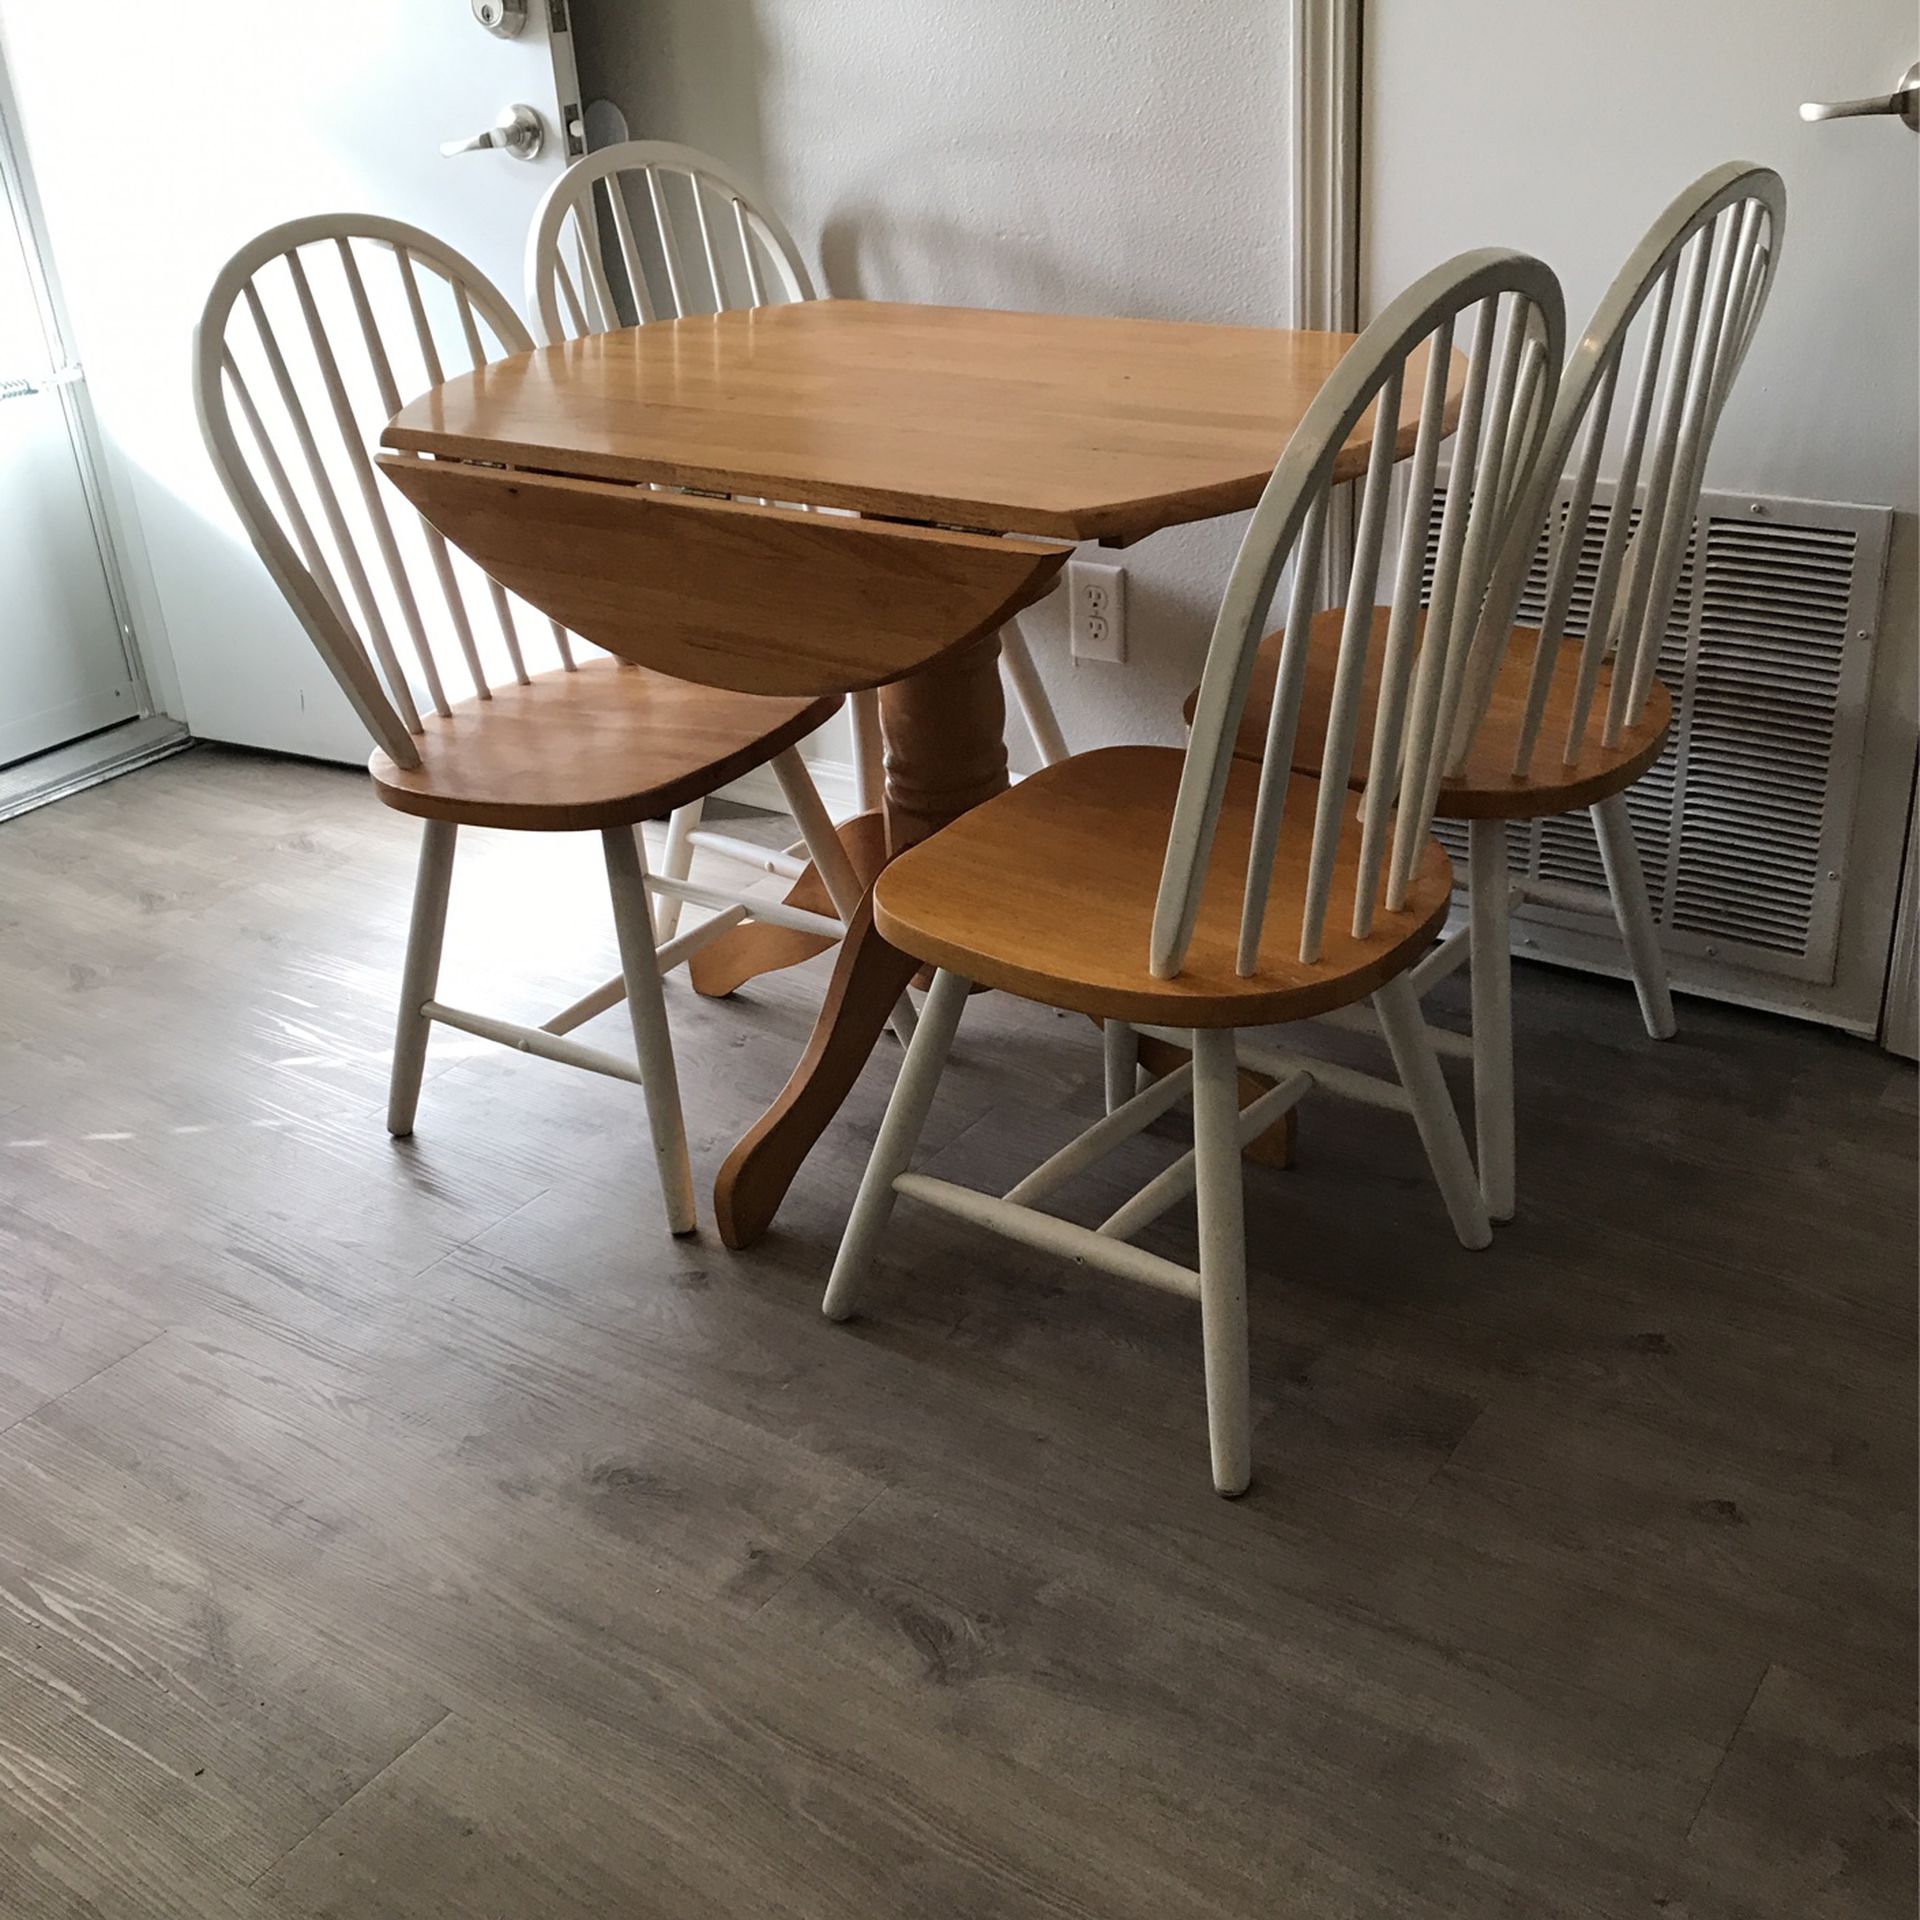 Farmhouse Style Drop Leaf Table With Four Chairs